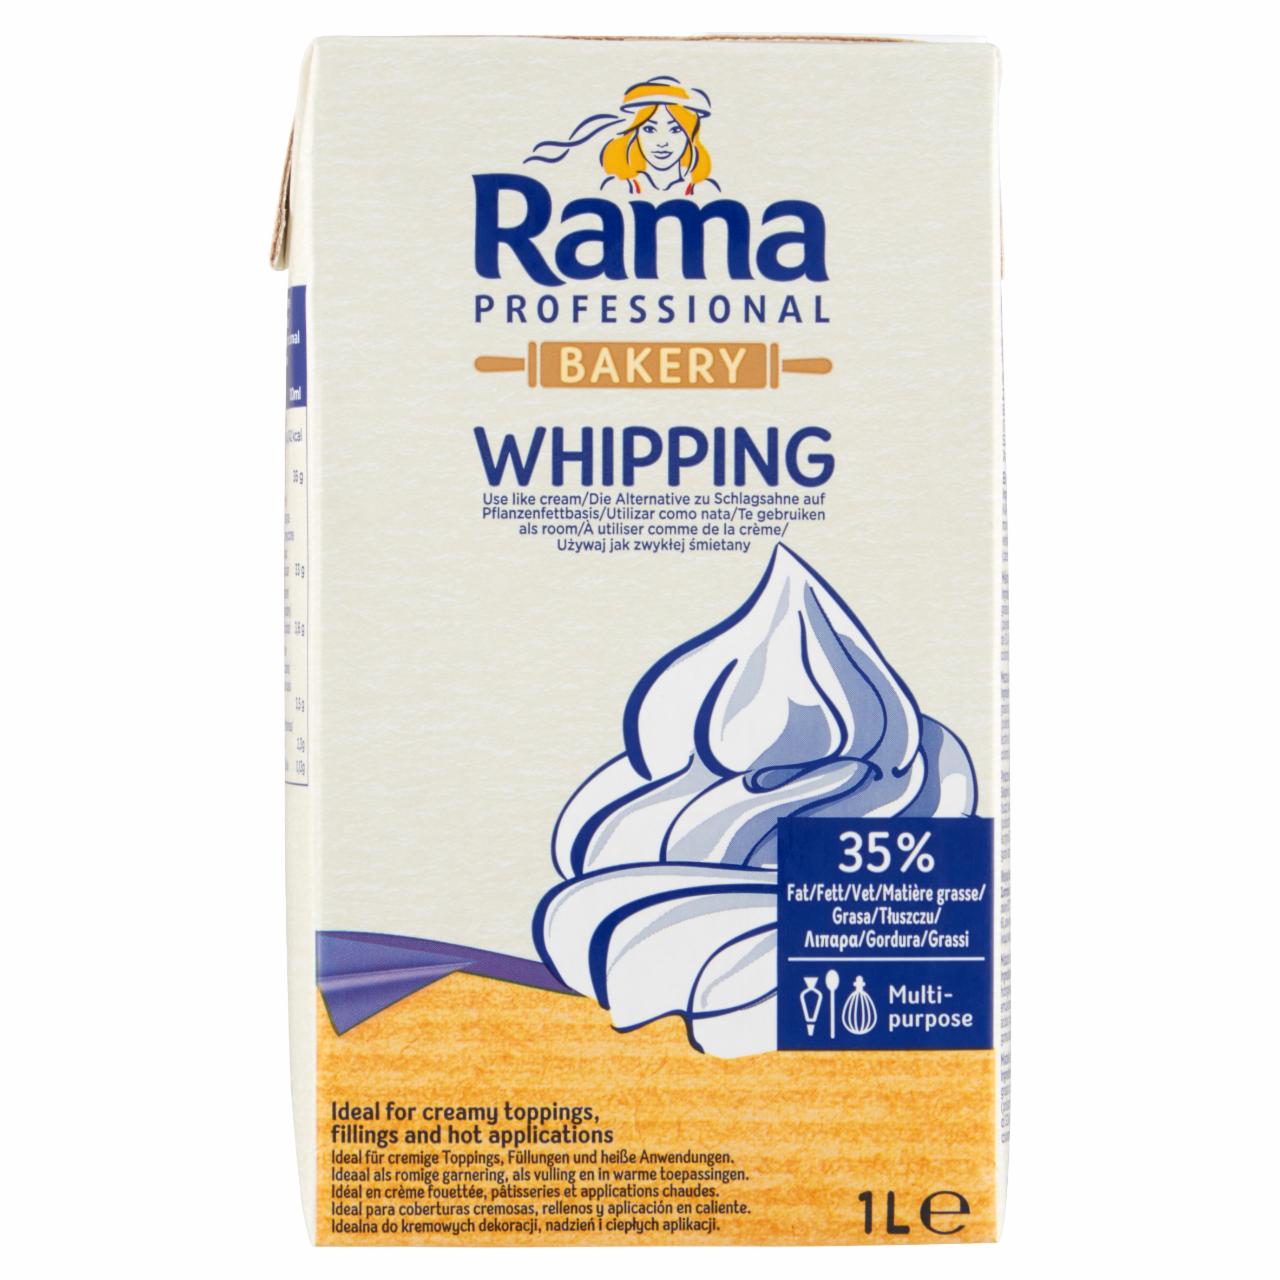 Photo - Rama Professional Bakery Whipping Blend of Buttermilk and Vegetable Fats 35% 1 L